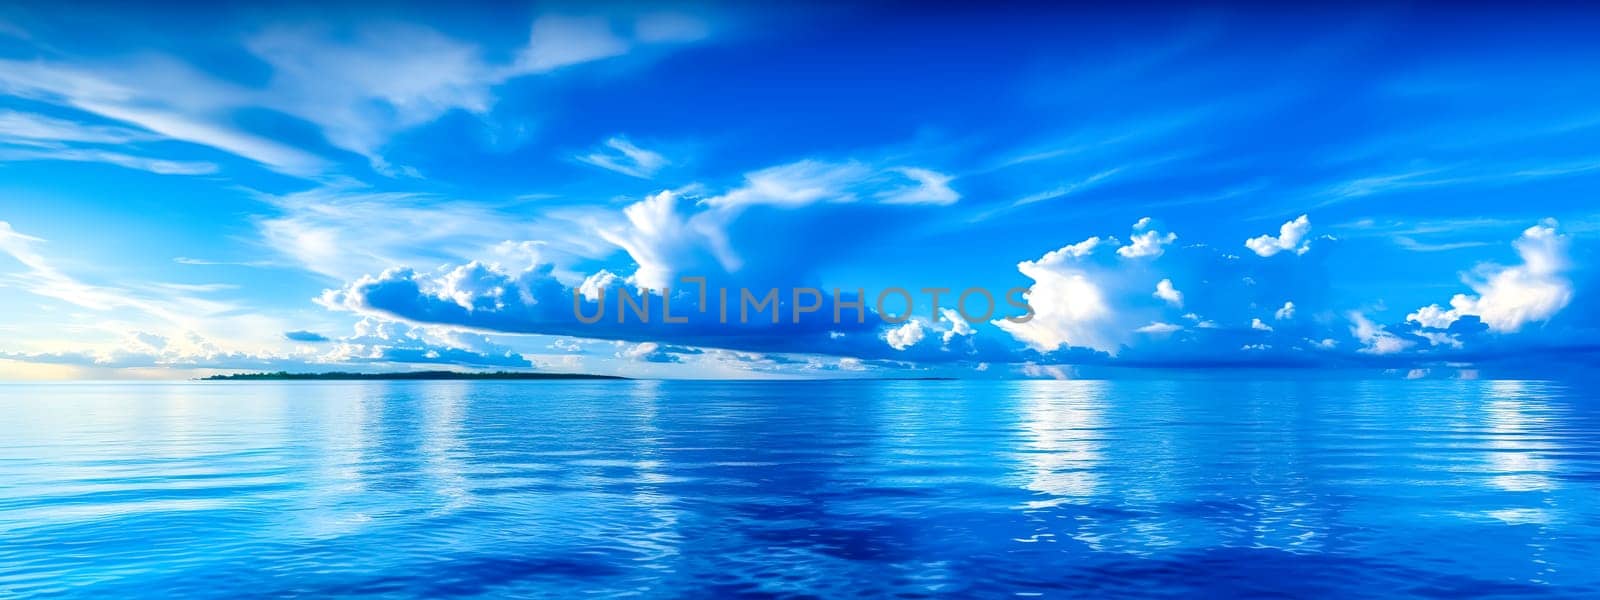 blue water surface of the ocean, clouds in the sky, banner made with Generative AI by Edophoto